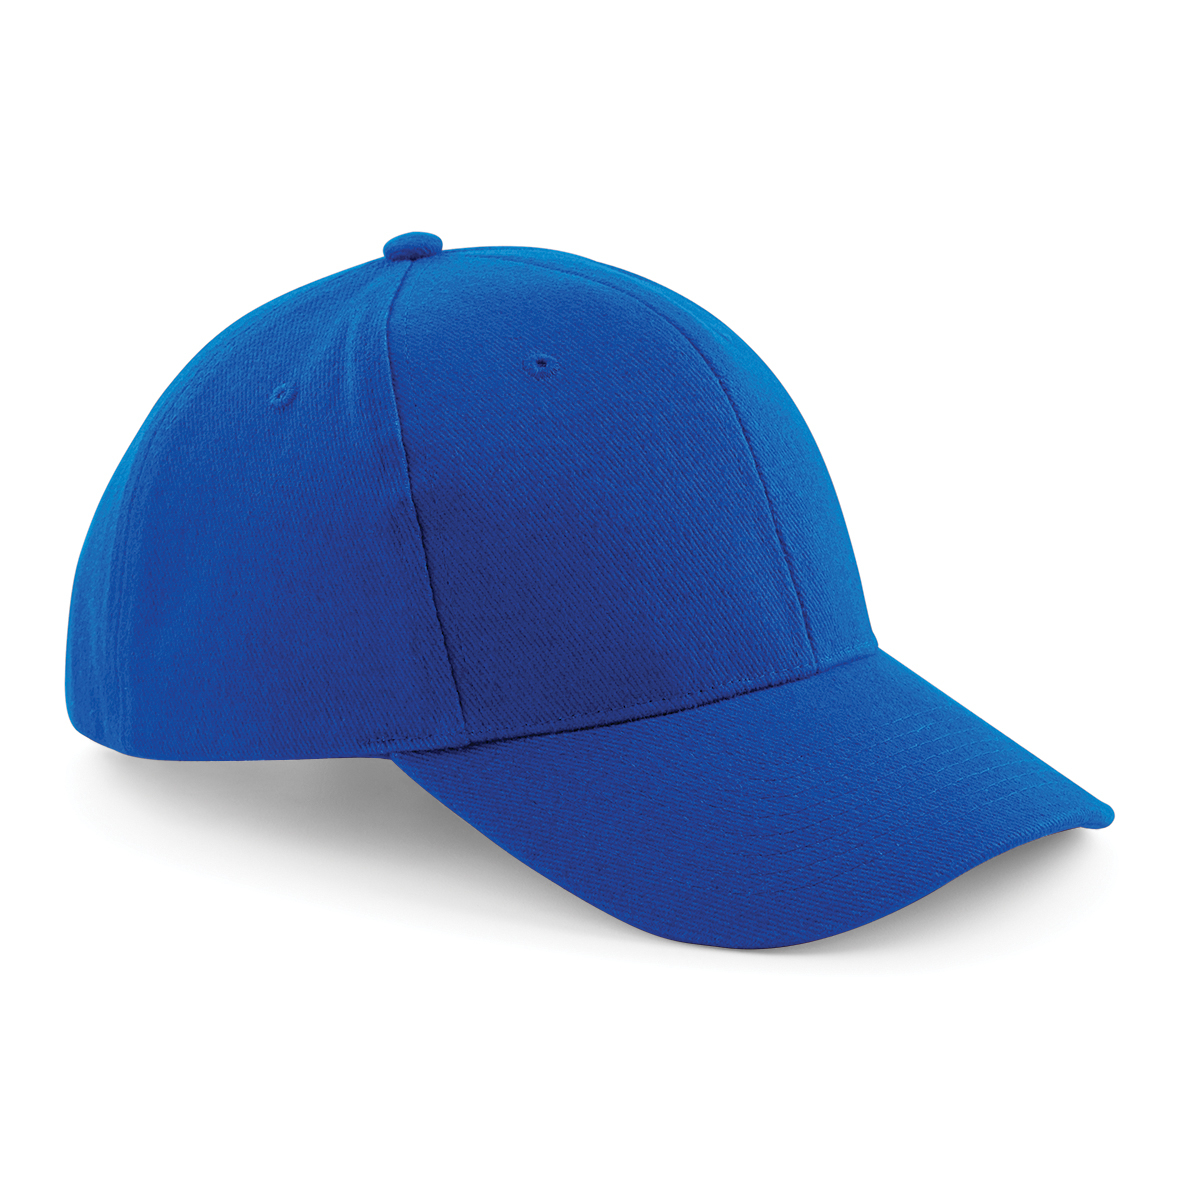 Pro-Style Heavy Brushed Cotton Cap in blue